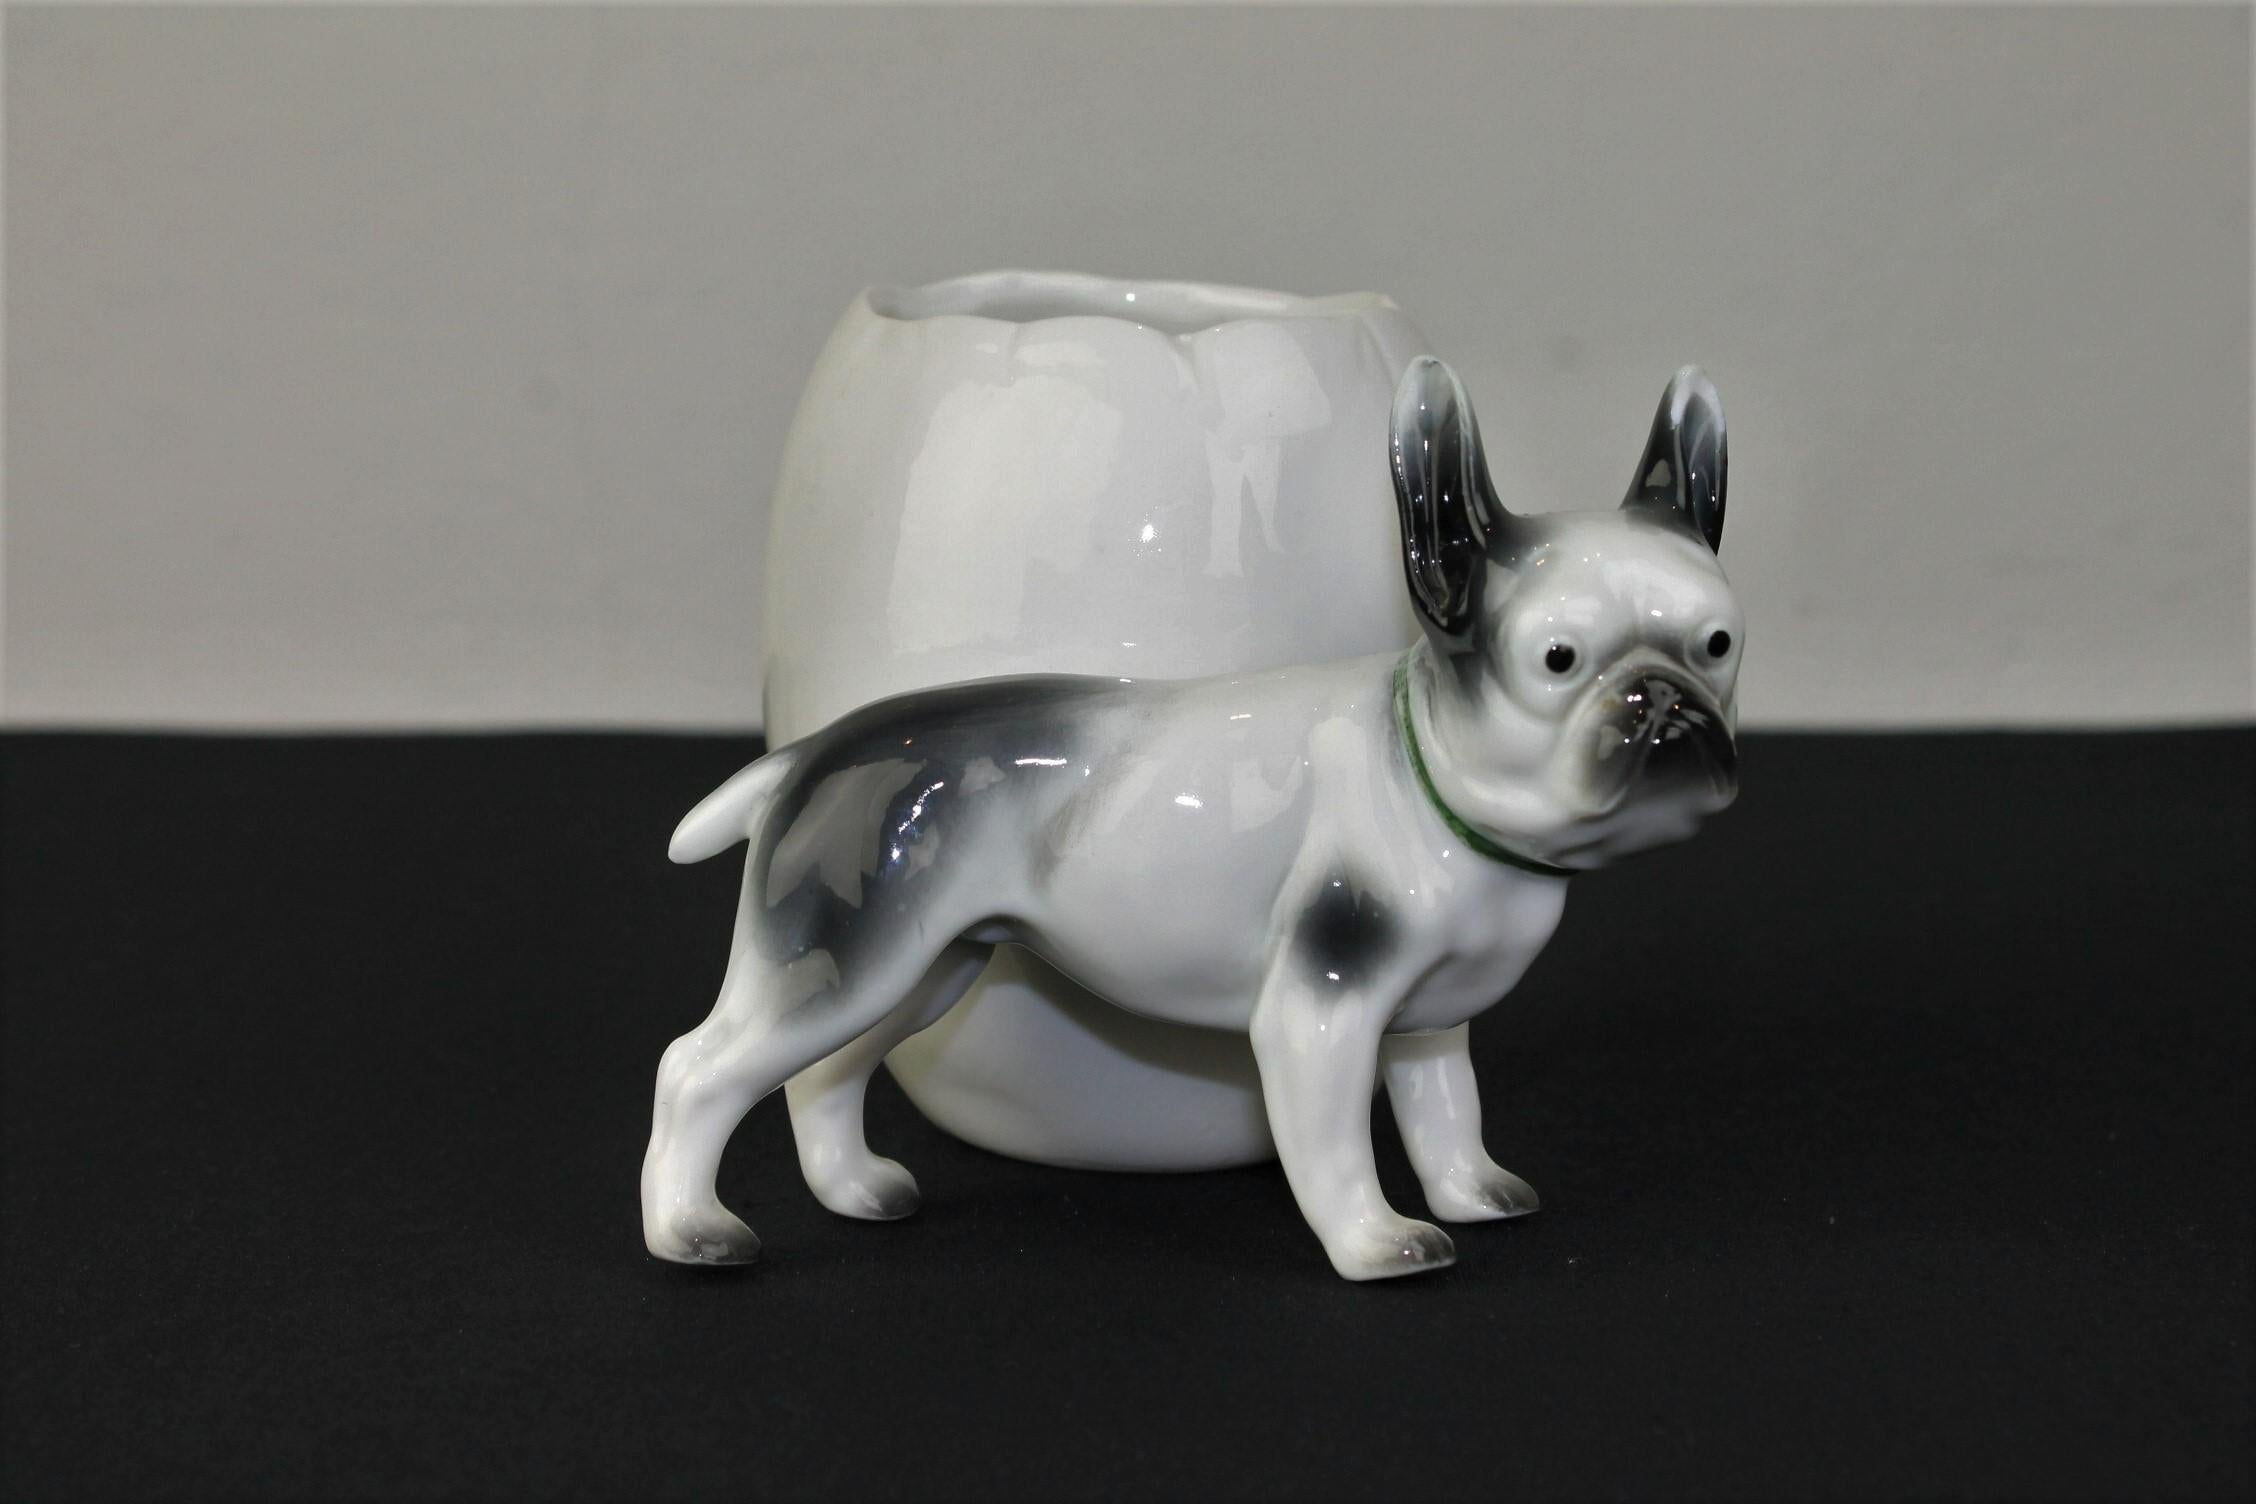 Porcelain French Bulldog sculpture with storage pot or planter.
It's a porcelain dog sculpture - dog figurine with an attached open storage pot which has a jagged edge like an egg. The white with grey Frenchie dog has a green collar around the